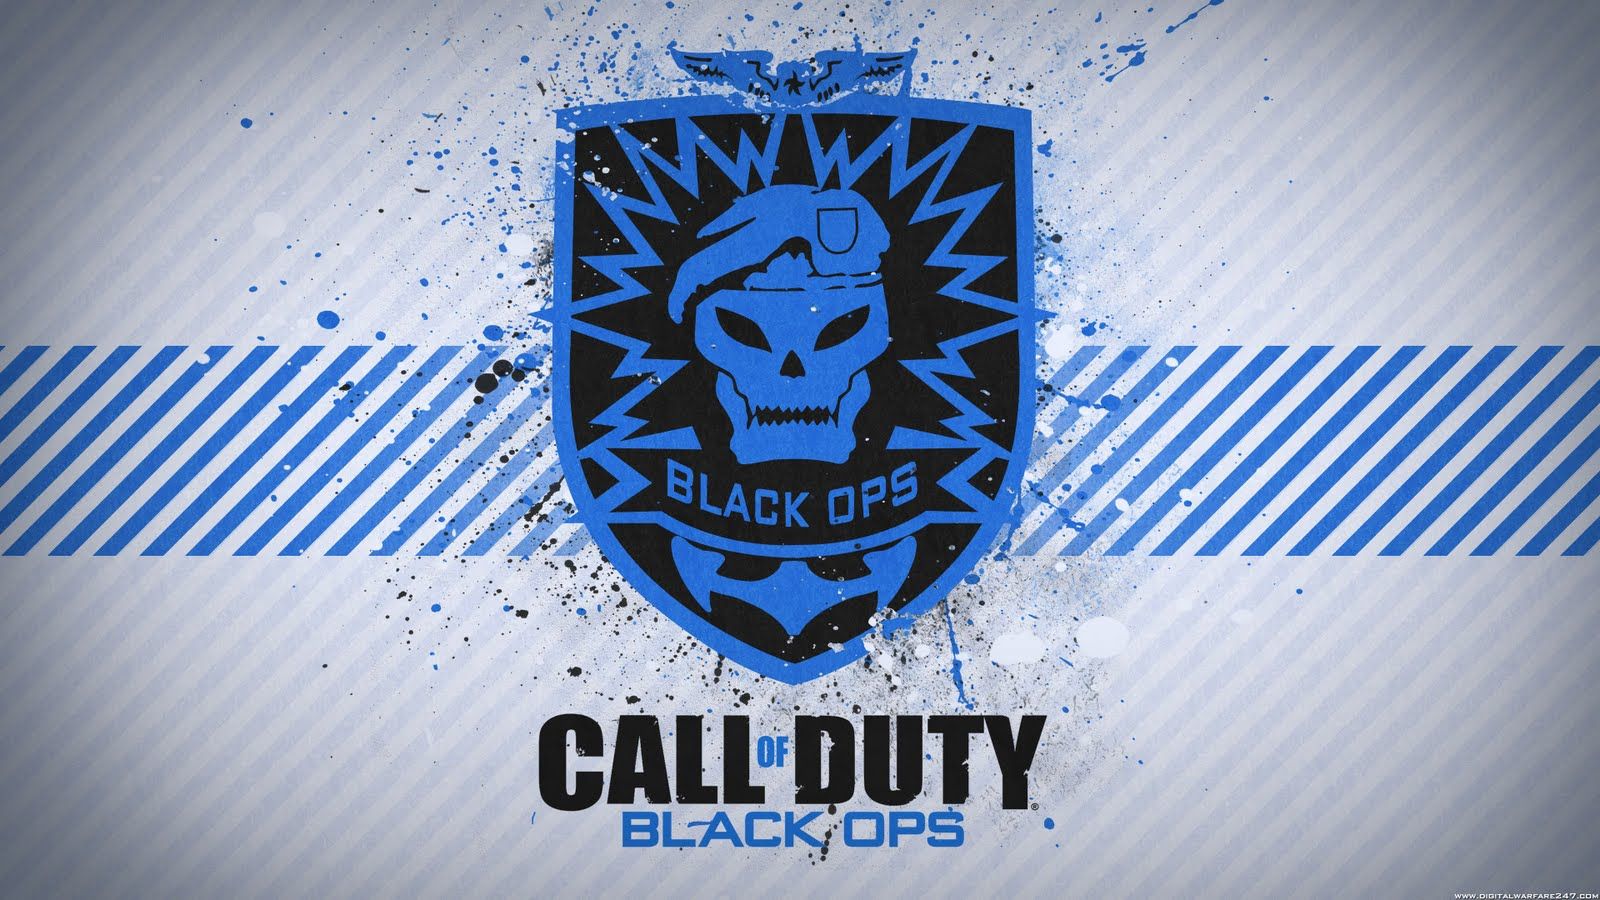 HD WALLPAPERS Call of Duty Black Ops HD Backgrounds